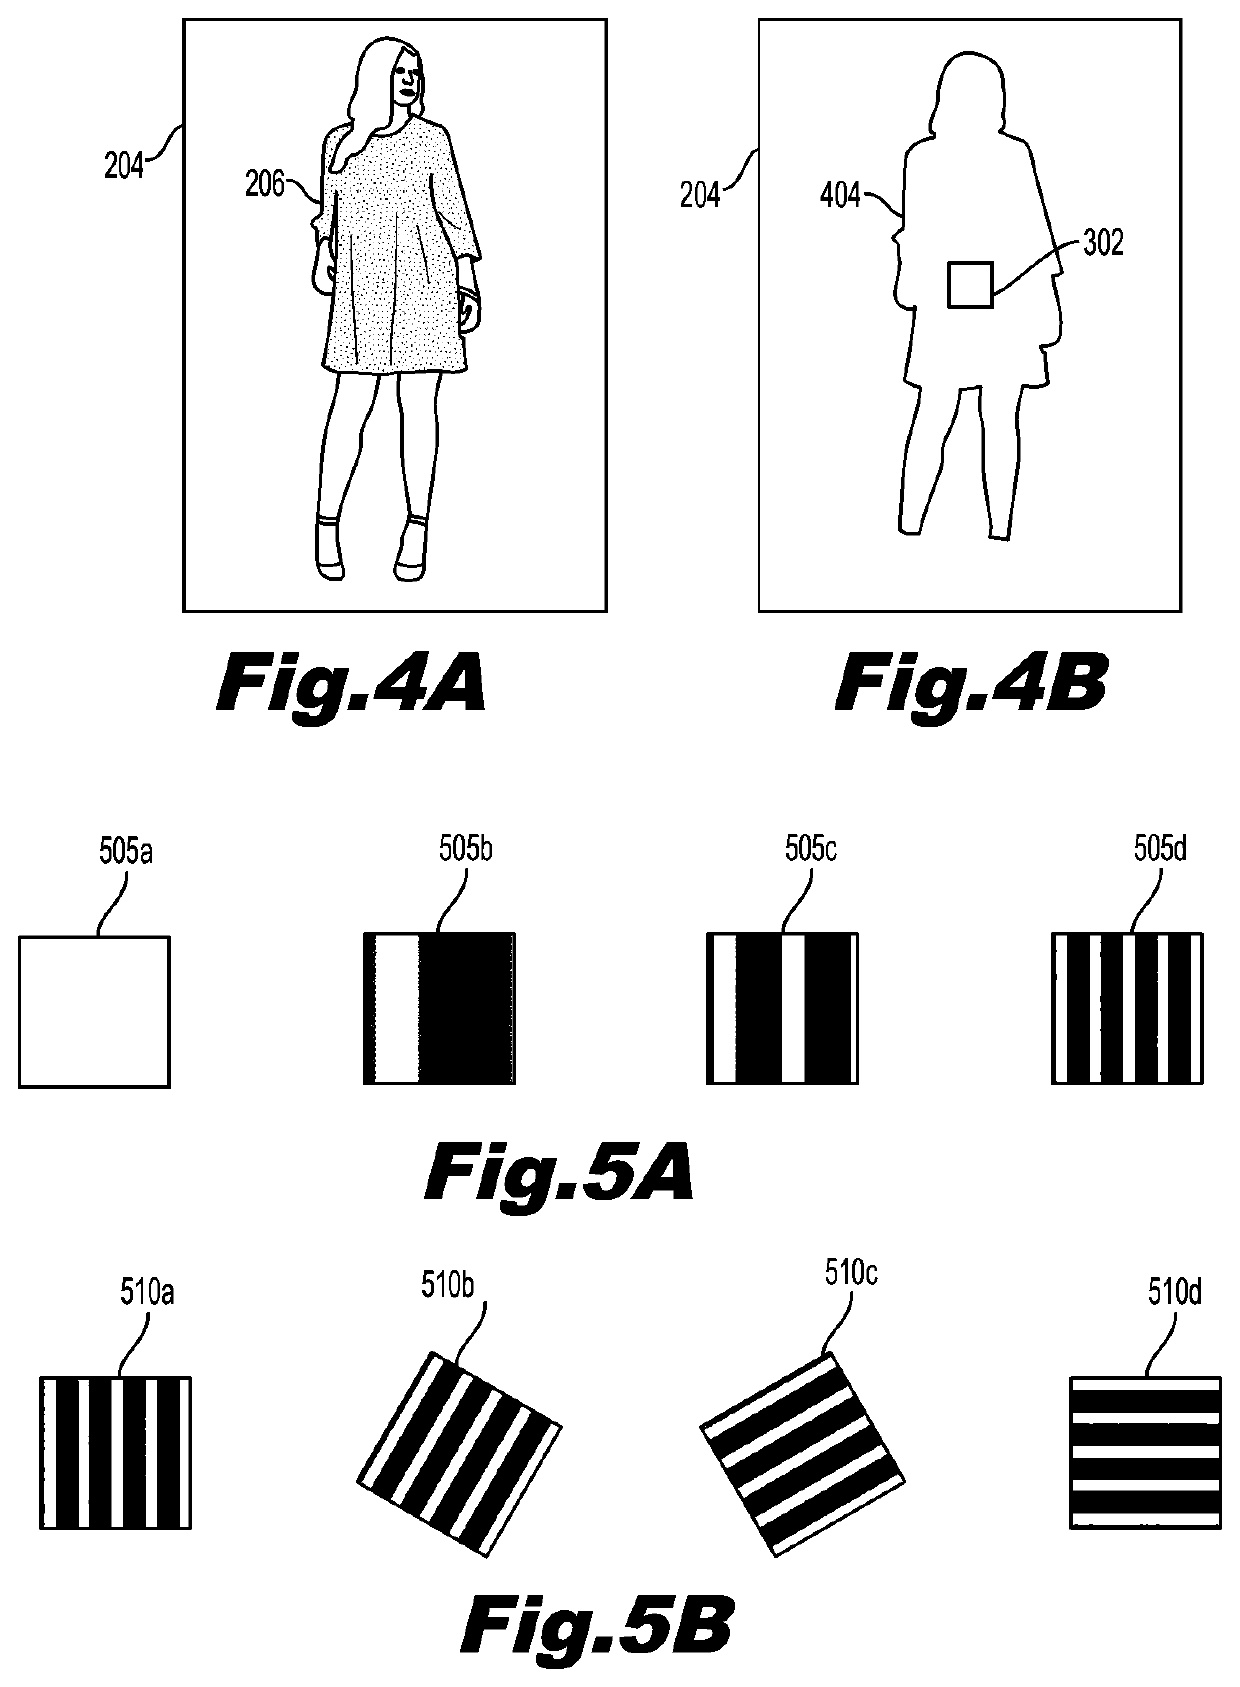 Systems and methods for analysis of wearable items of a clothing subscription platform